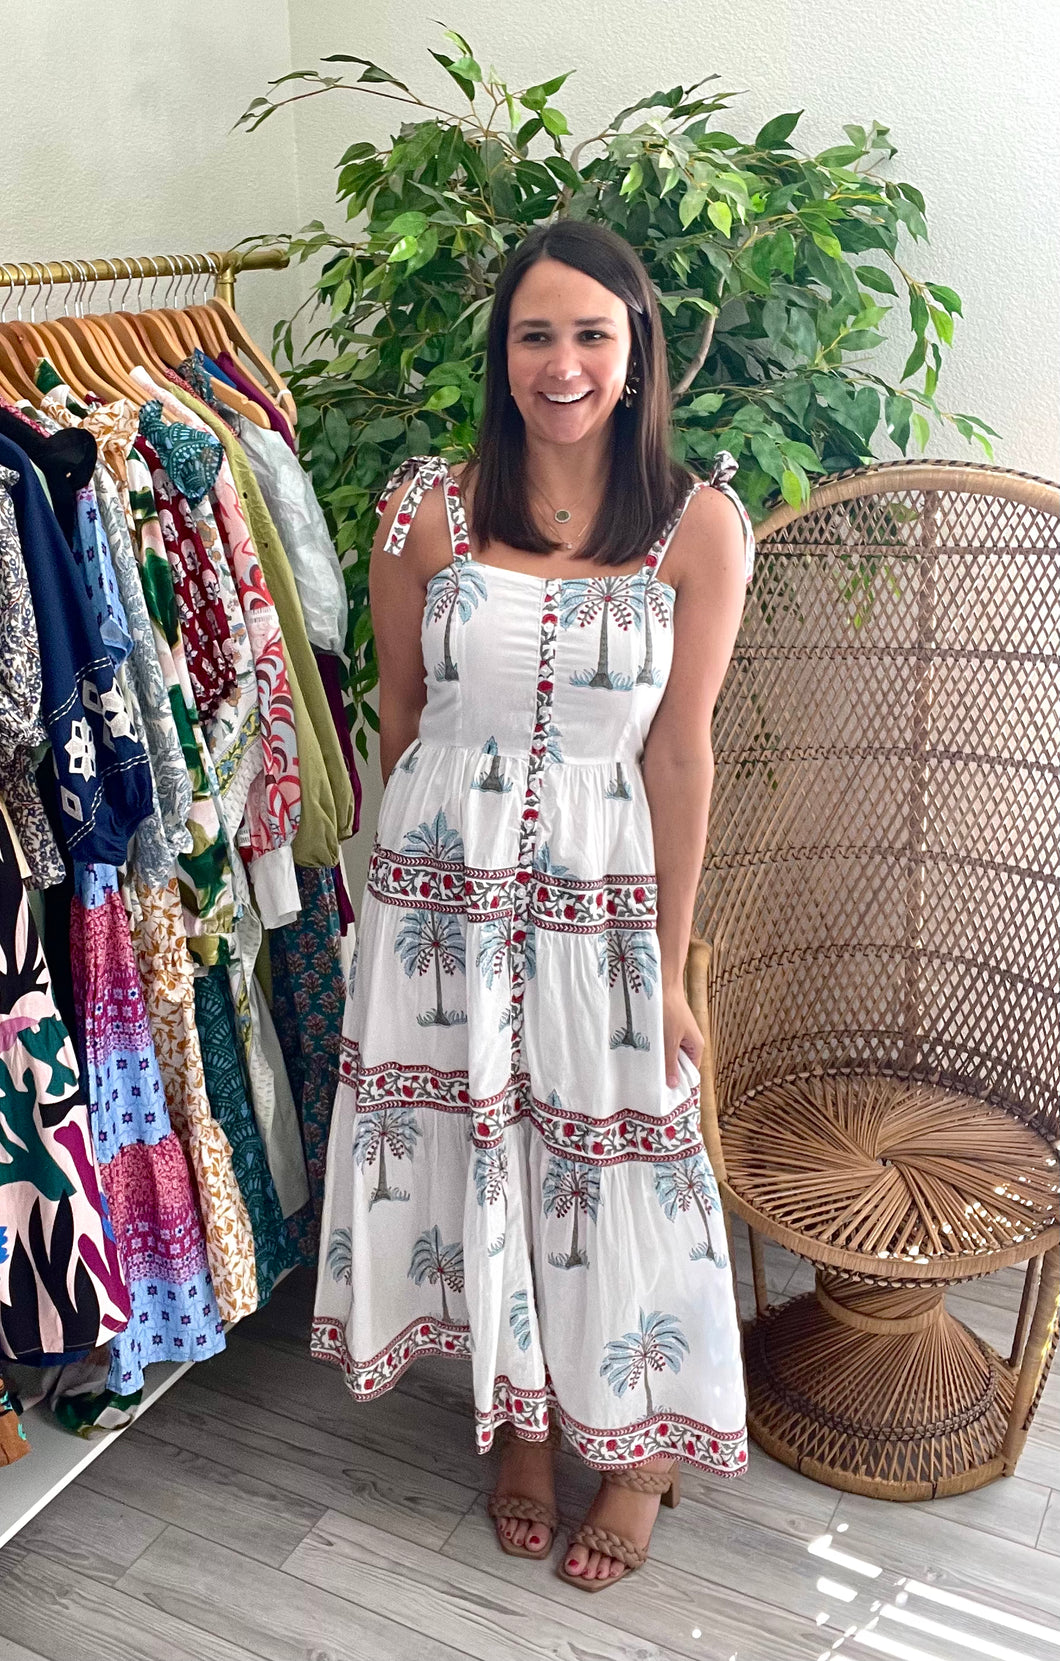 Kiawah printed ankle dress with tie straps and button front. Back zipper closure. Light weight cotton and double lined.  Size up, wearing size small. Always an XS in this brand.